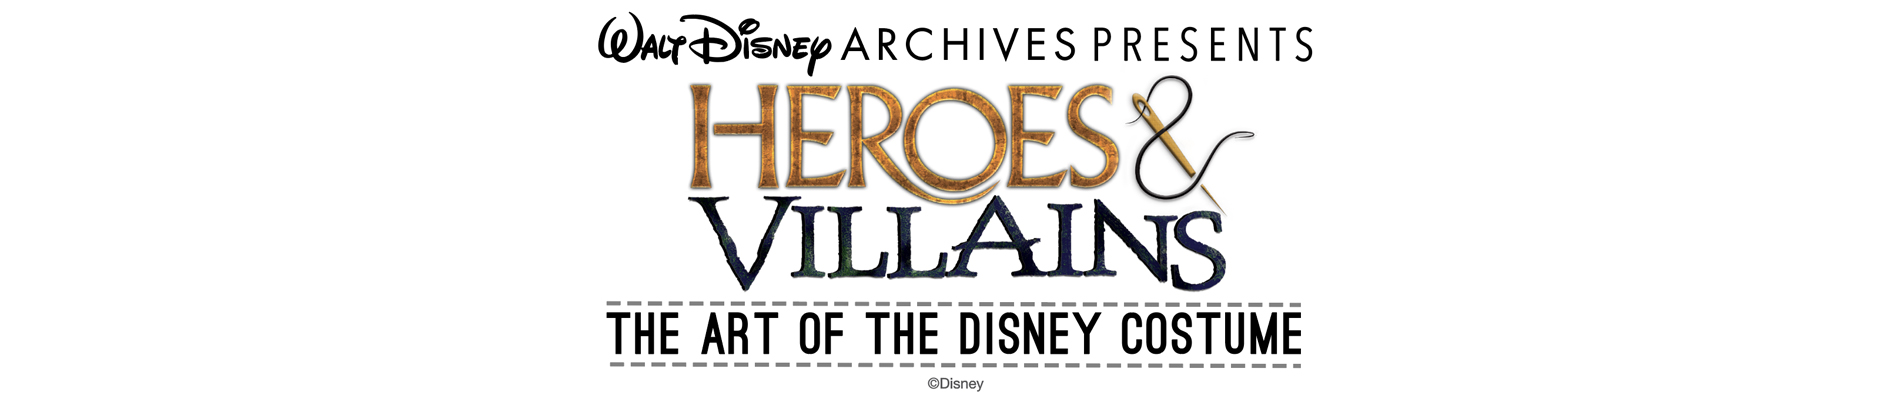 Heroes & Villains: The Art of the Disney Costume